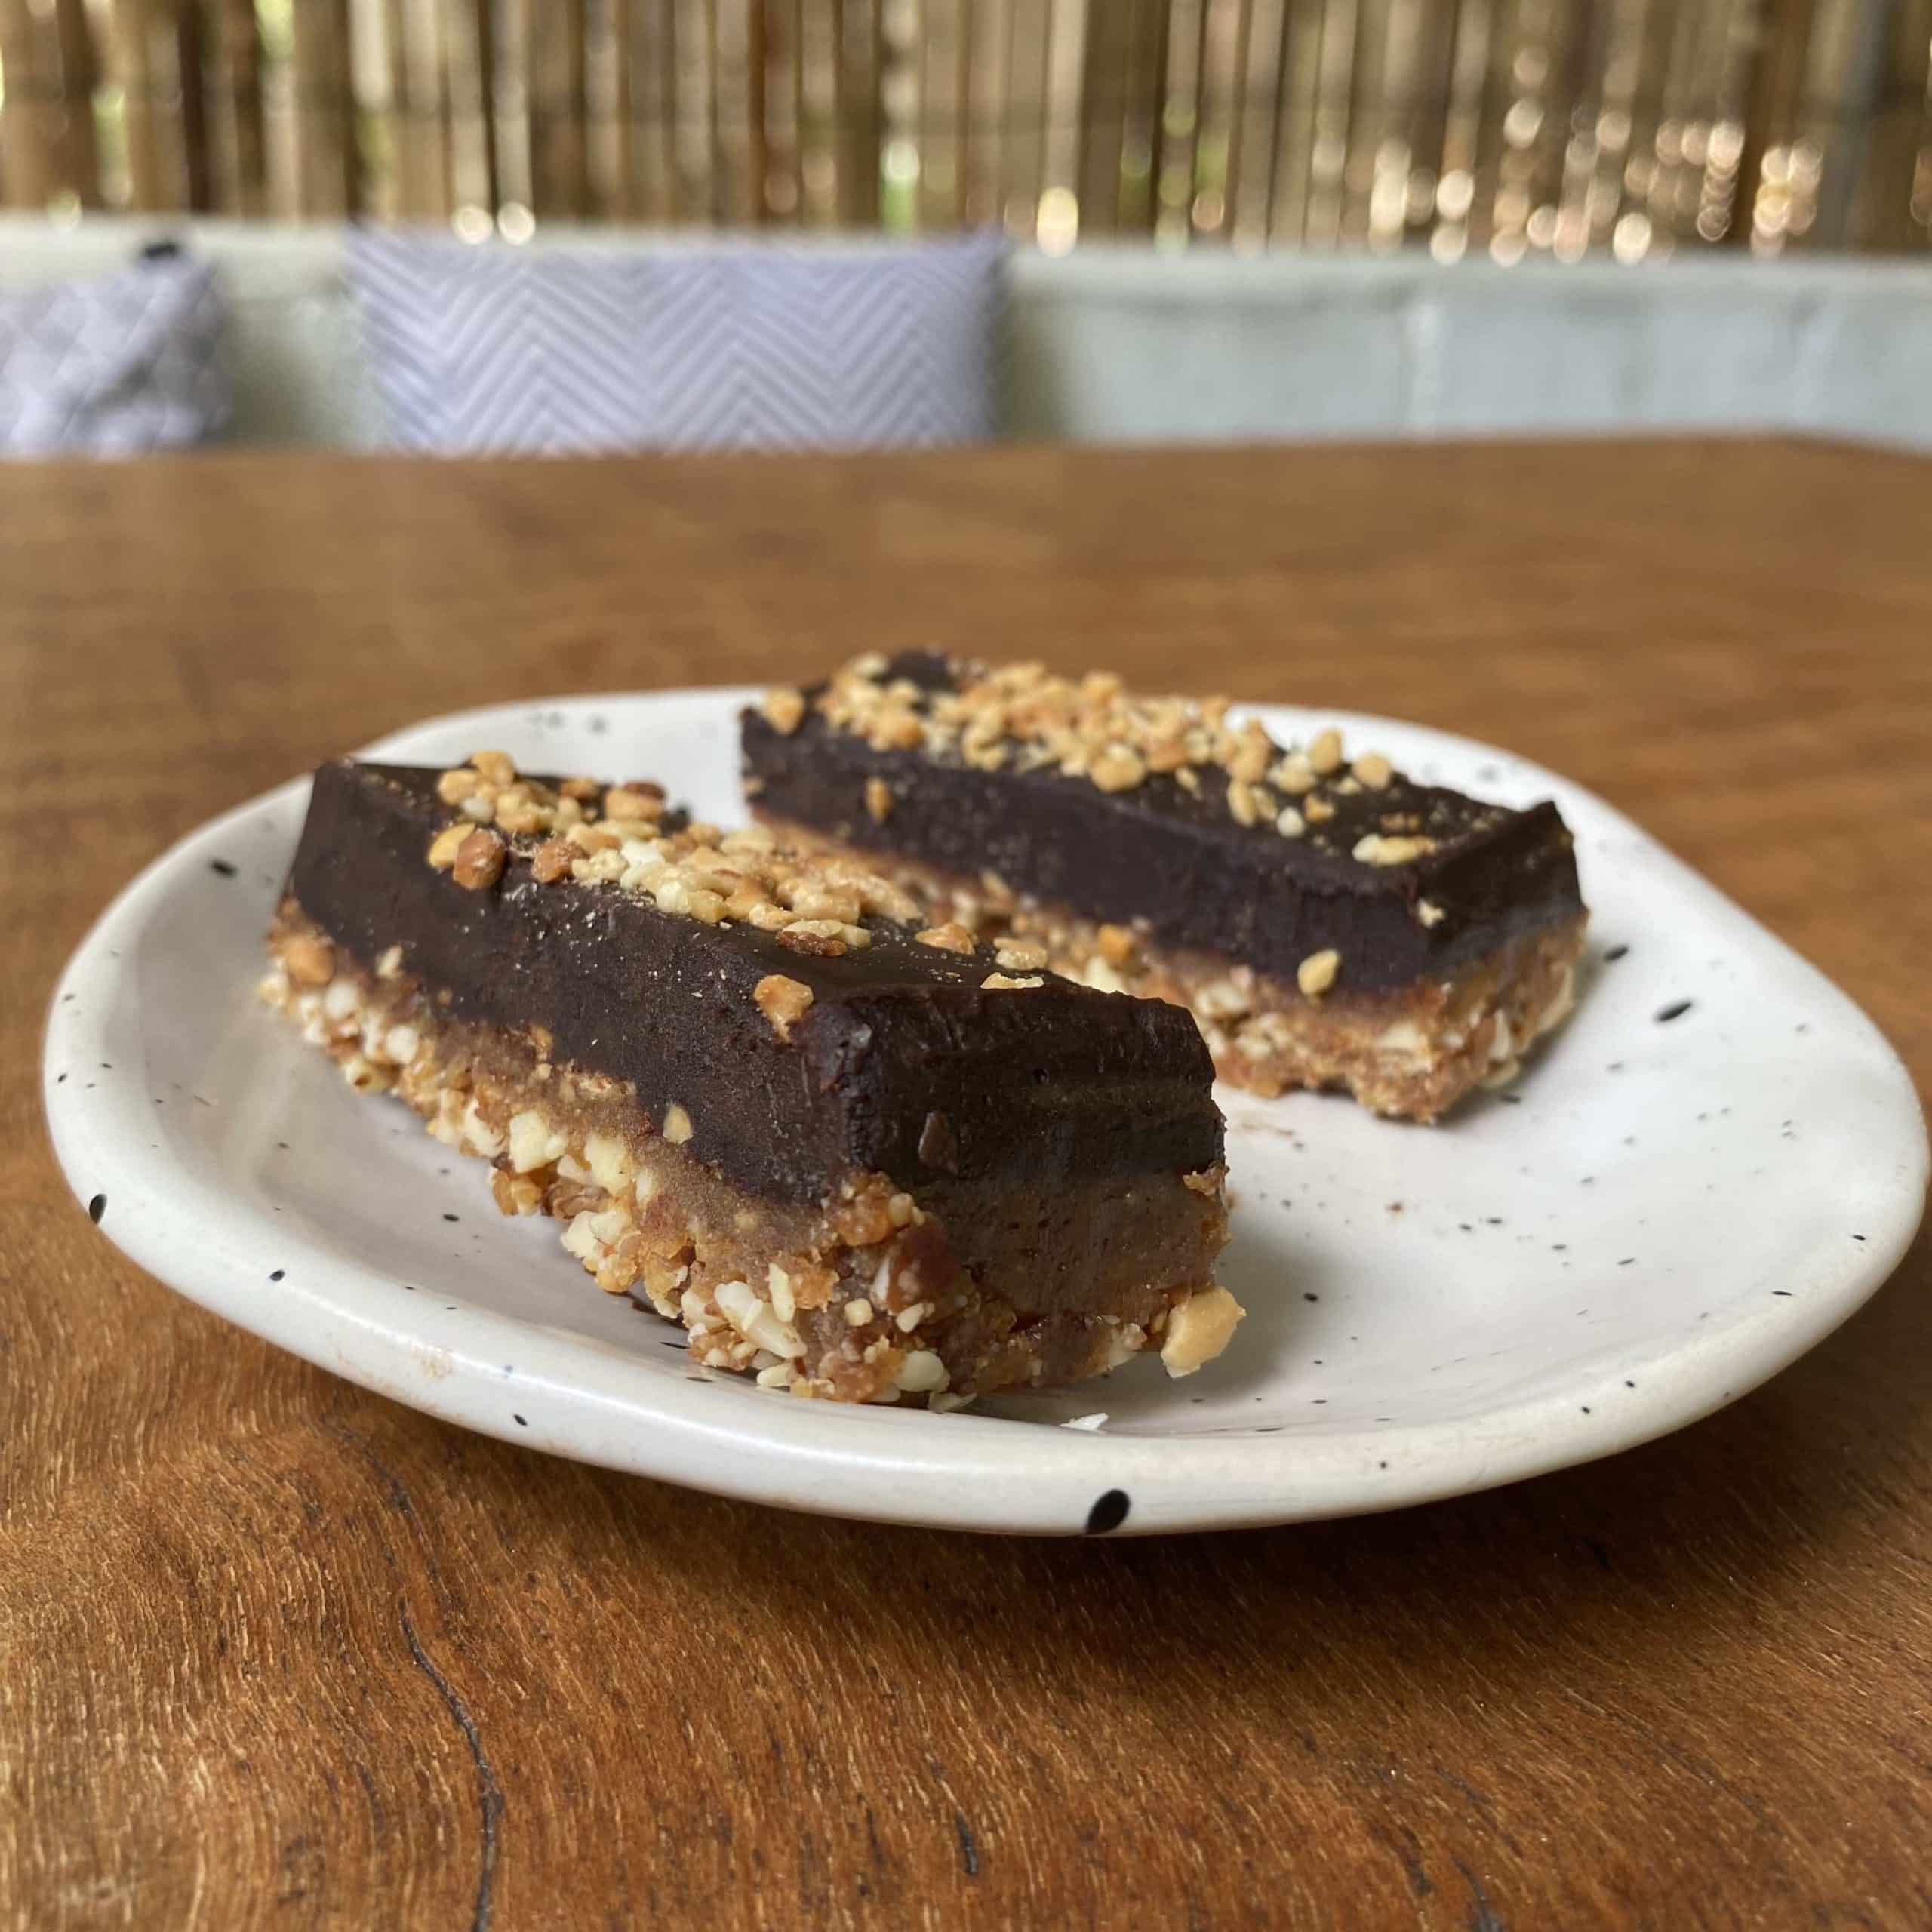 Bunker Cafe Koh Tao - Snickers bar